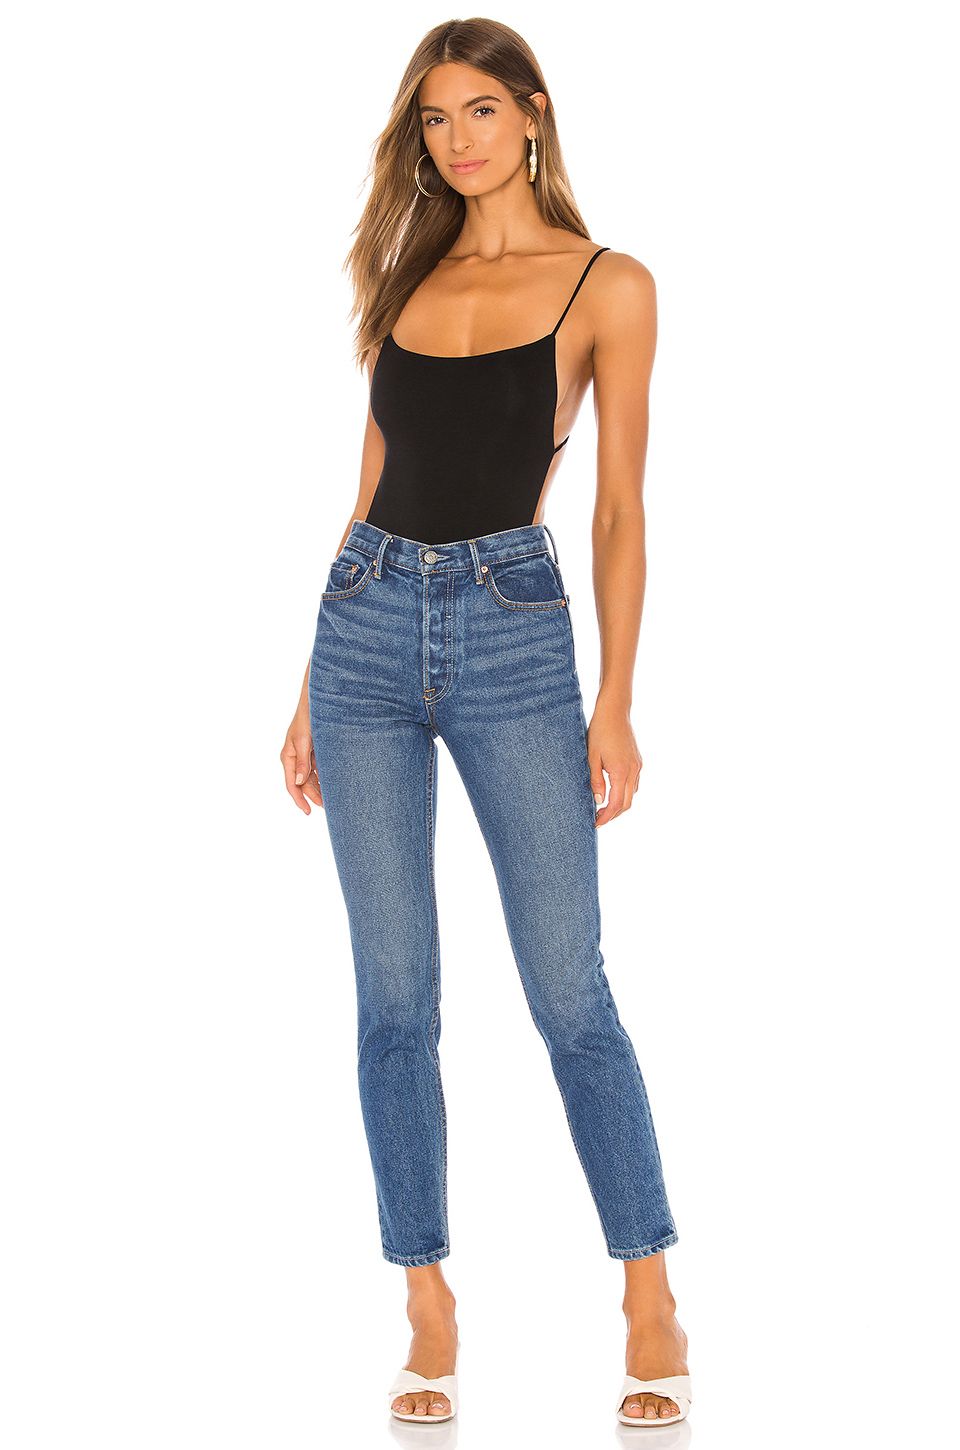 Bodysuit outfits with jeans